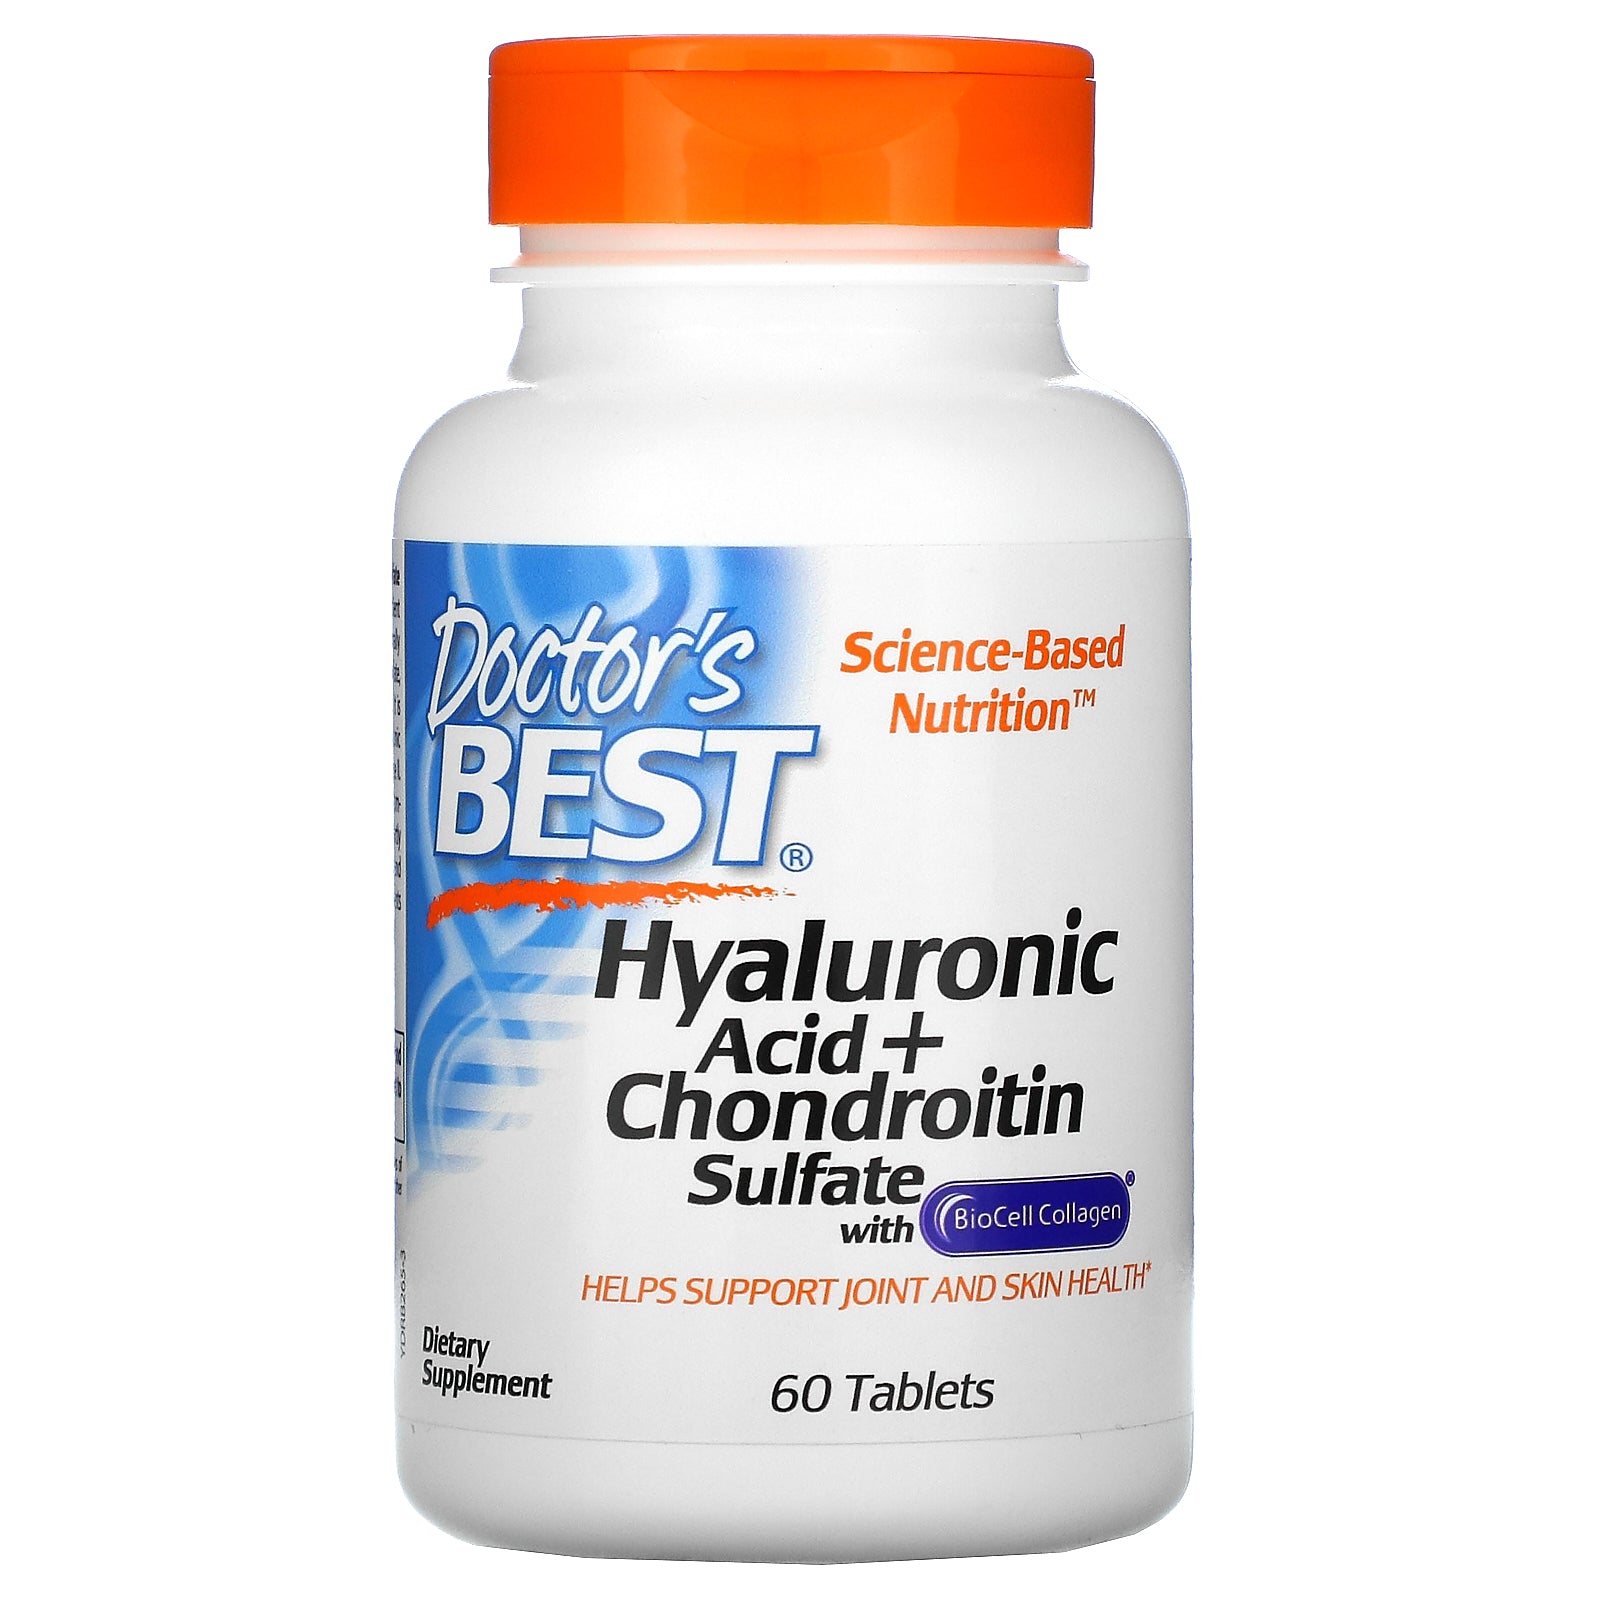 Doctor's Best, Hyaluronic Acid + Chondroitin Sulfate with BioCell Collagen